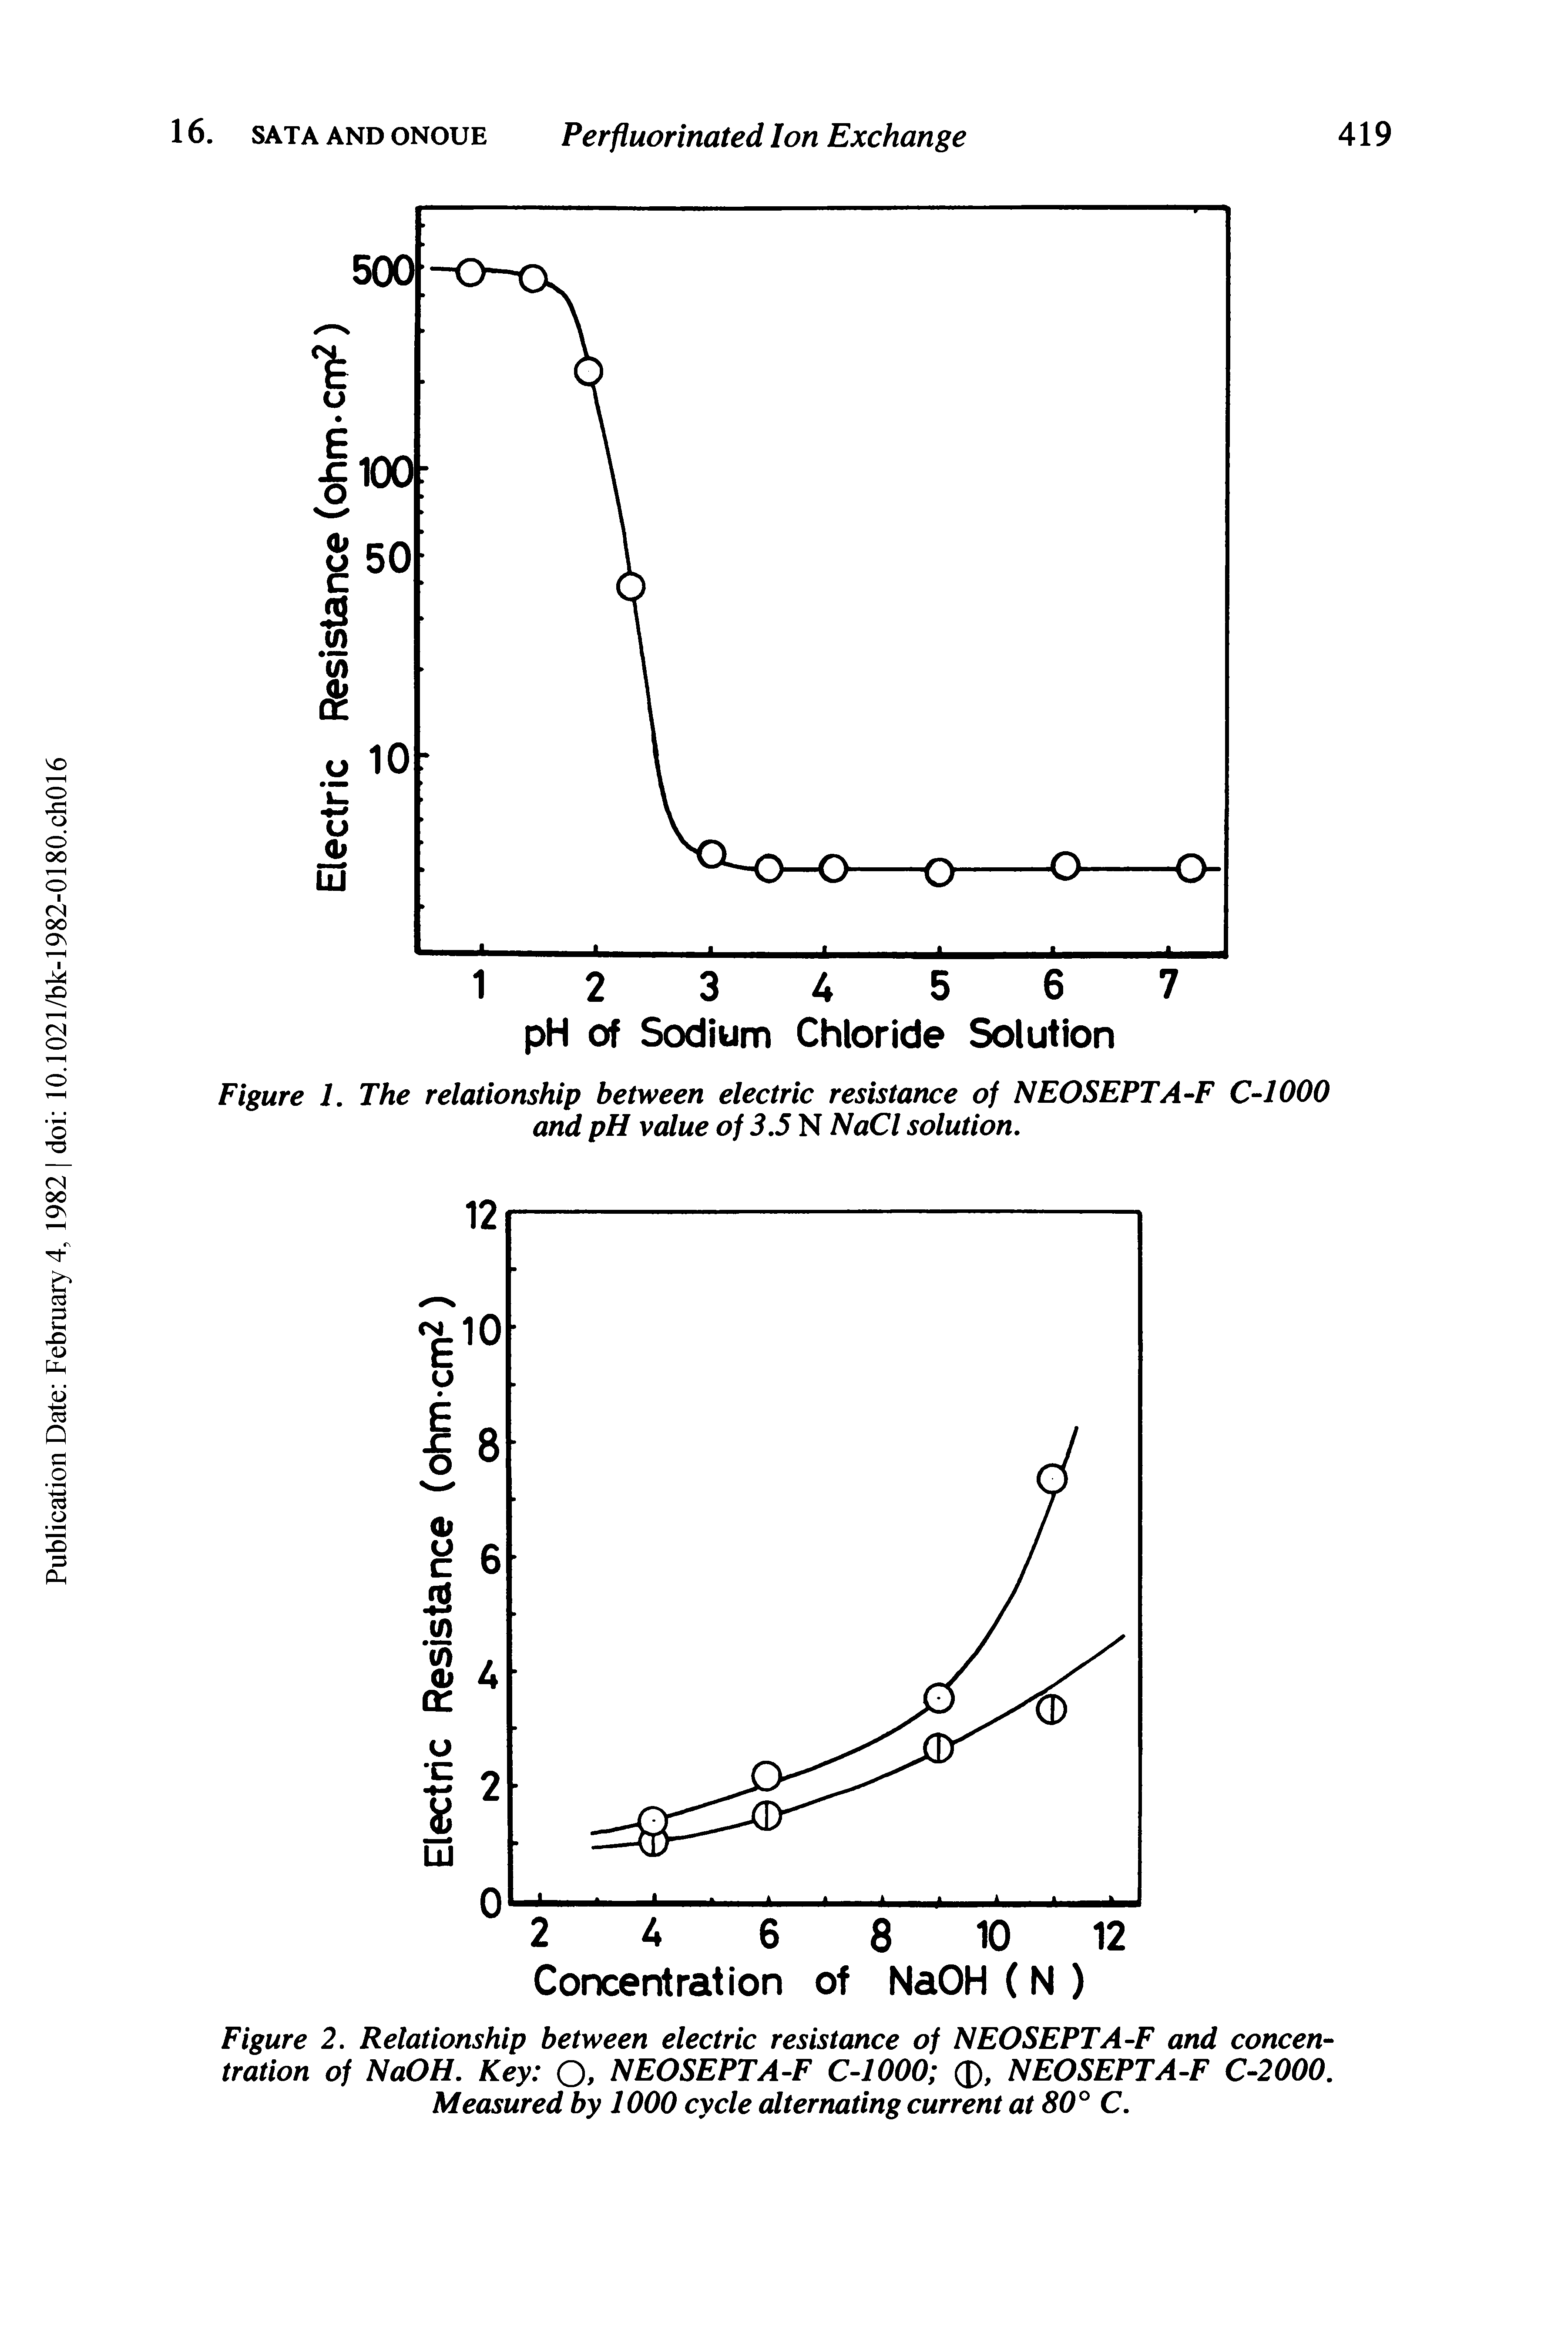 Figure 2. Relationship between electric resistance of NEOSEPT A-F and concentration of NaOH. Key Q, NEOSEPTA-F C-1000 , NEOSEPTA-F C-2000. Measured by 1000 cycle alternating current at 80° C.